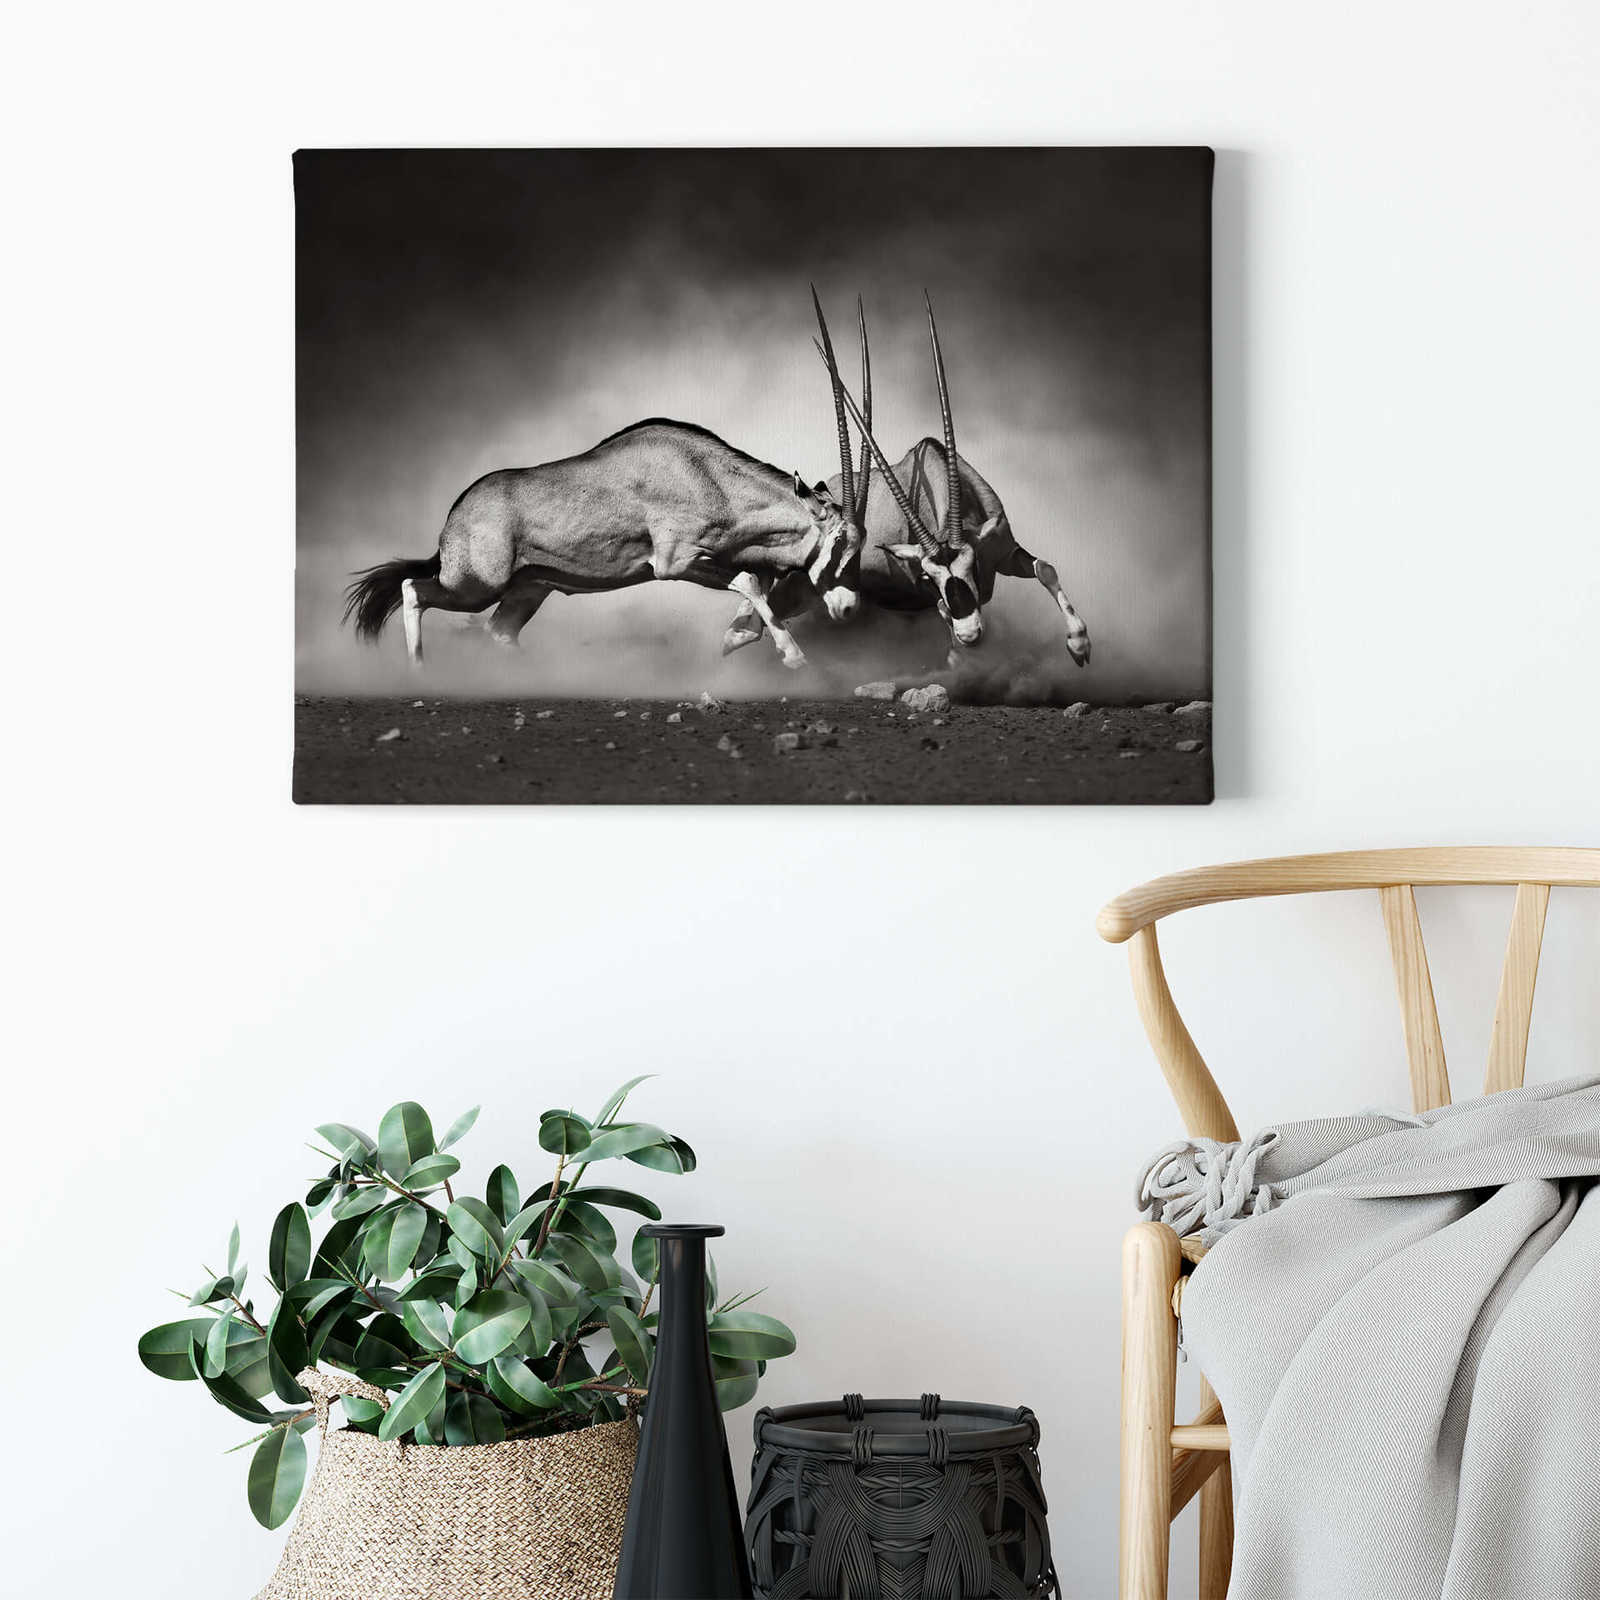             Animal canvas print duel in the steppe – black and white
        